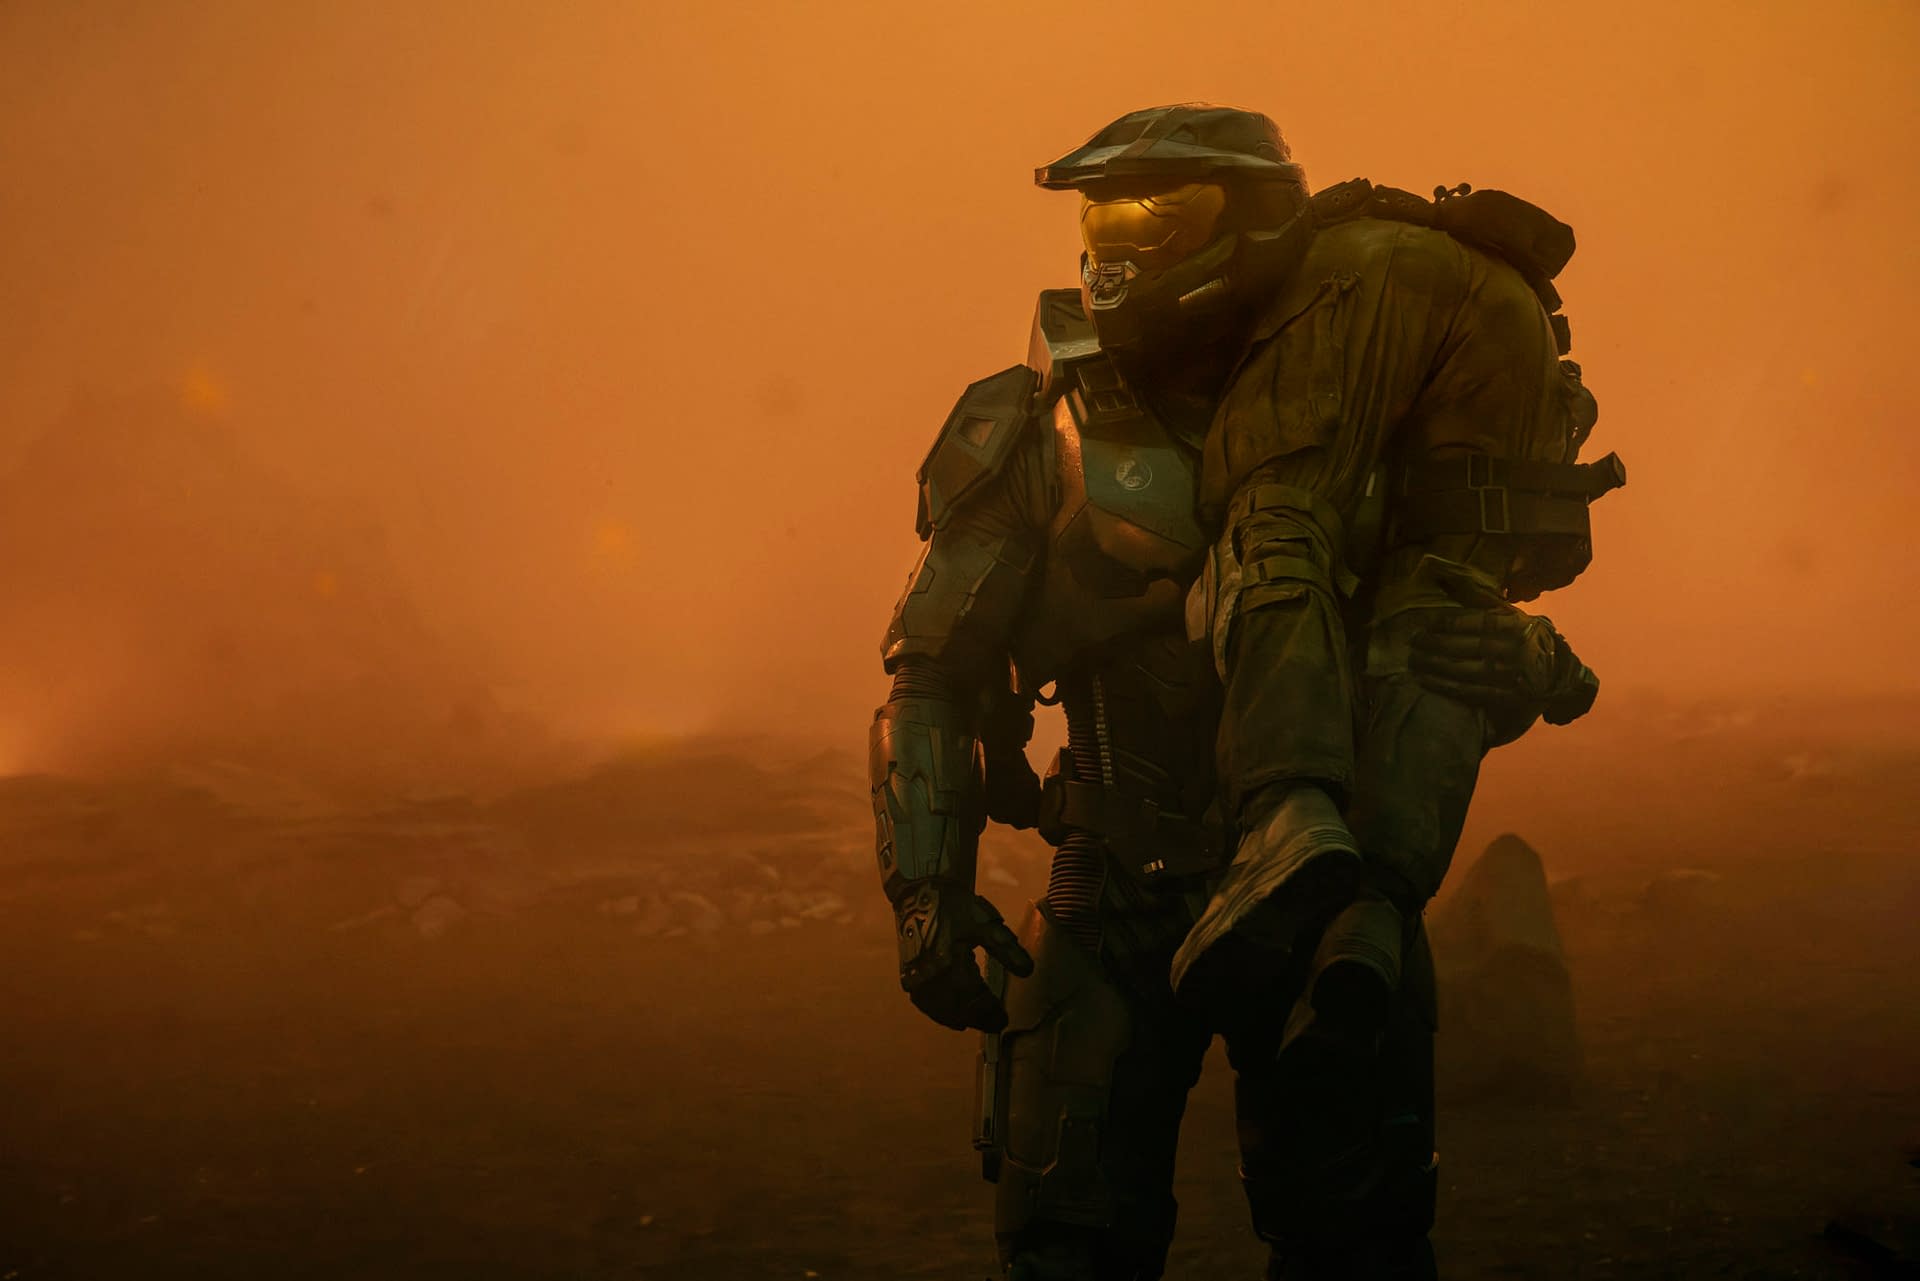 HALO Season 2 Master Chief Returns in Paramount+ Official Trailer